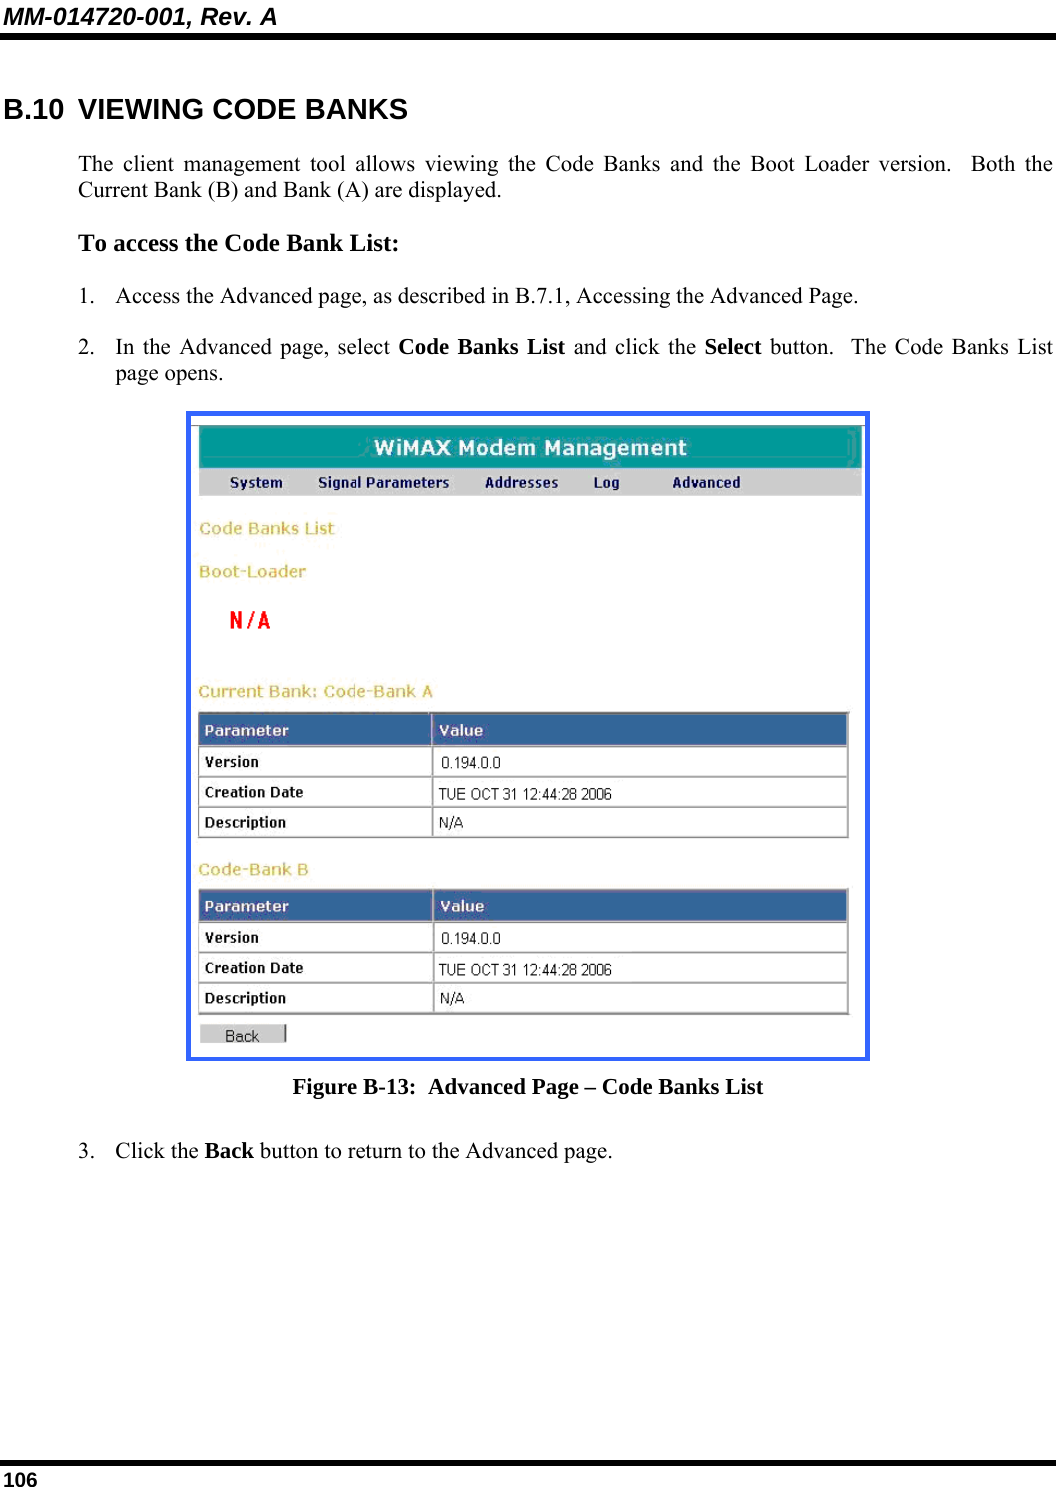 MM-014720-001, Rev. A 106 B.10  VIEWING CODE BANKS The client management tool allows viewing the Code Banks and the Boot Loader version.  Both the Current Bank (B) and Bank (A) are displayed.  To access the Code Bank List:  1. Access the Advanced page, as described in B.7.1, Accessing the Advanced Page.  2. In the Advanced page, select Code Banks List and click the Select button.  The Code Banks List page opens.   Figure B-13:  Advanced Page – Code Banks List 3. Click the Back button to return to the Advanced page. 